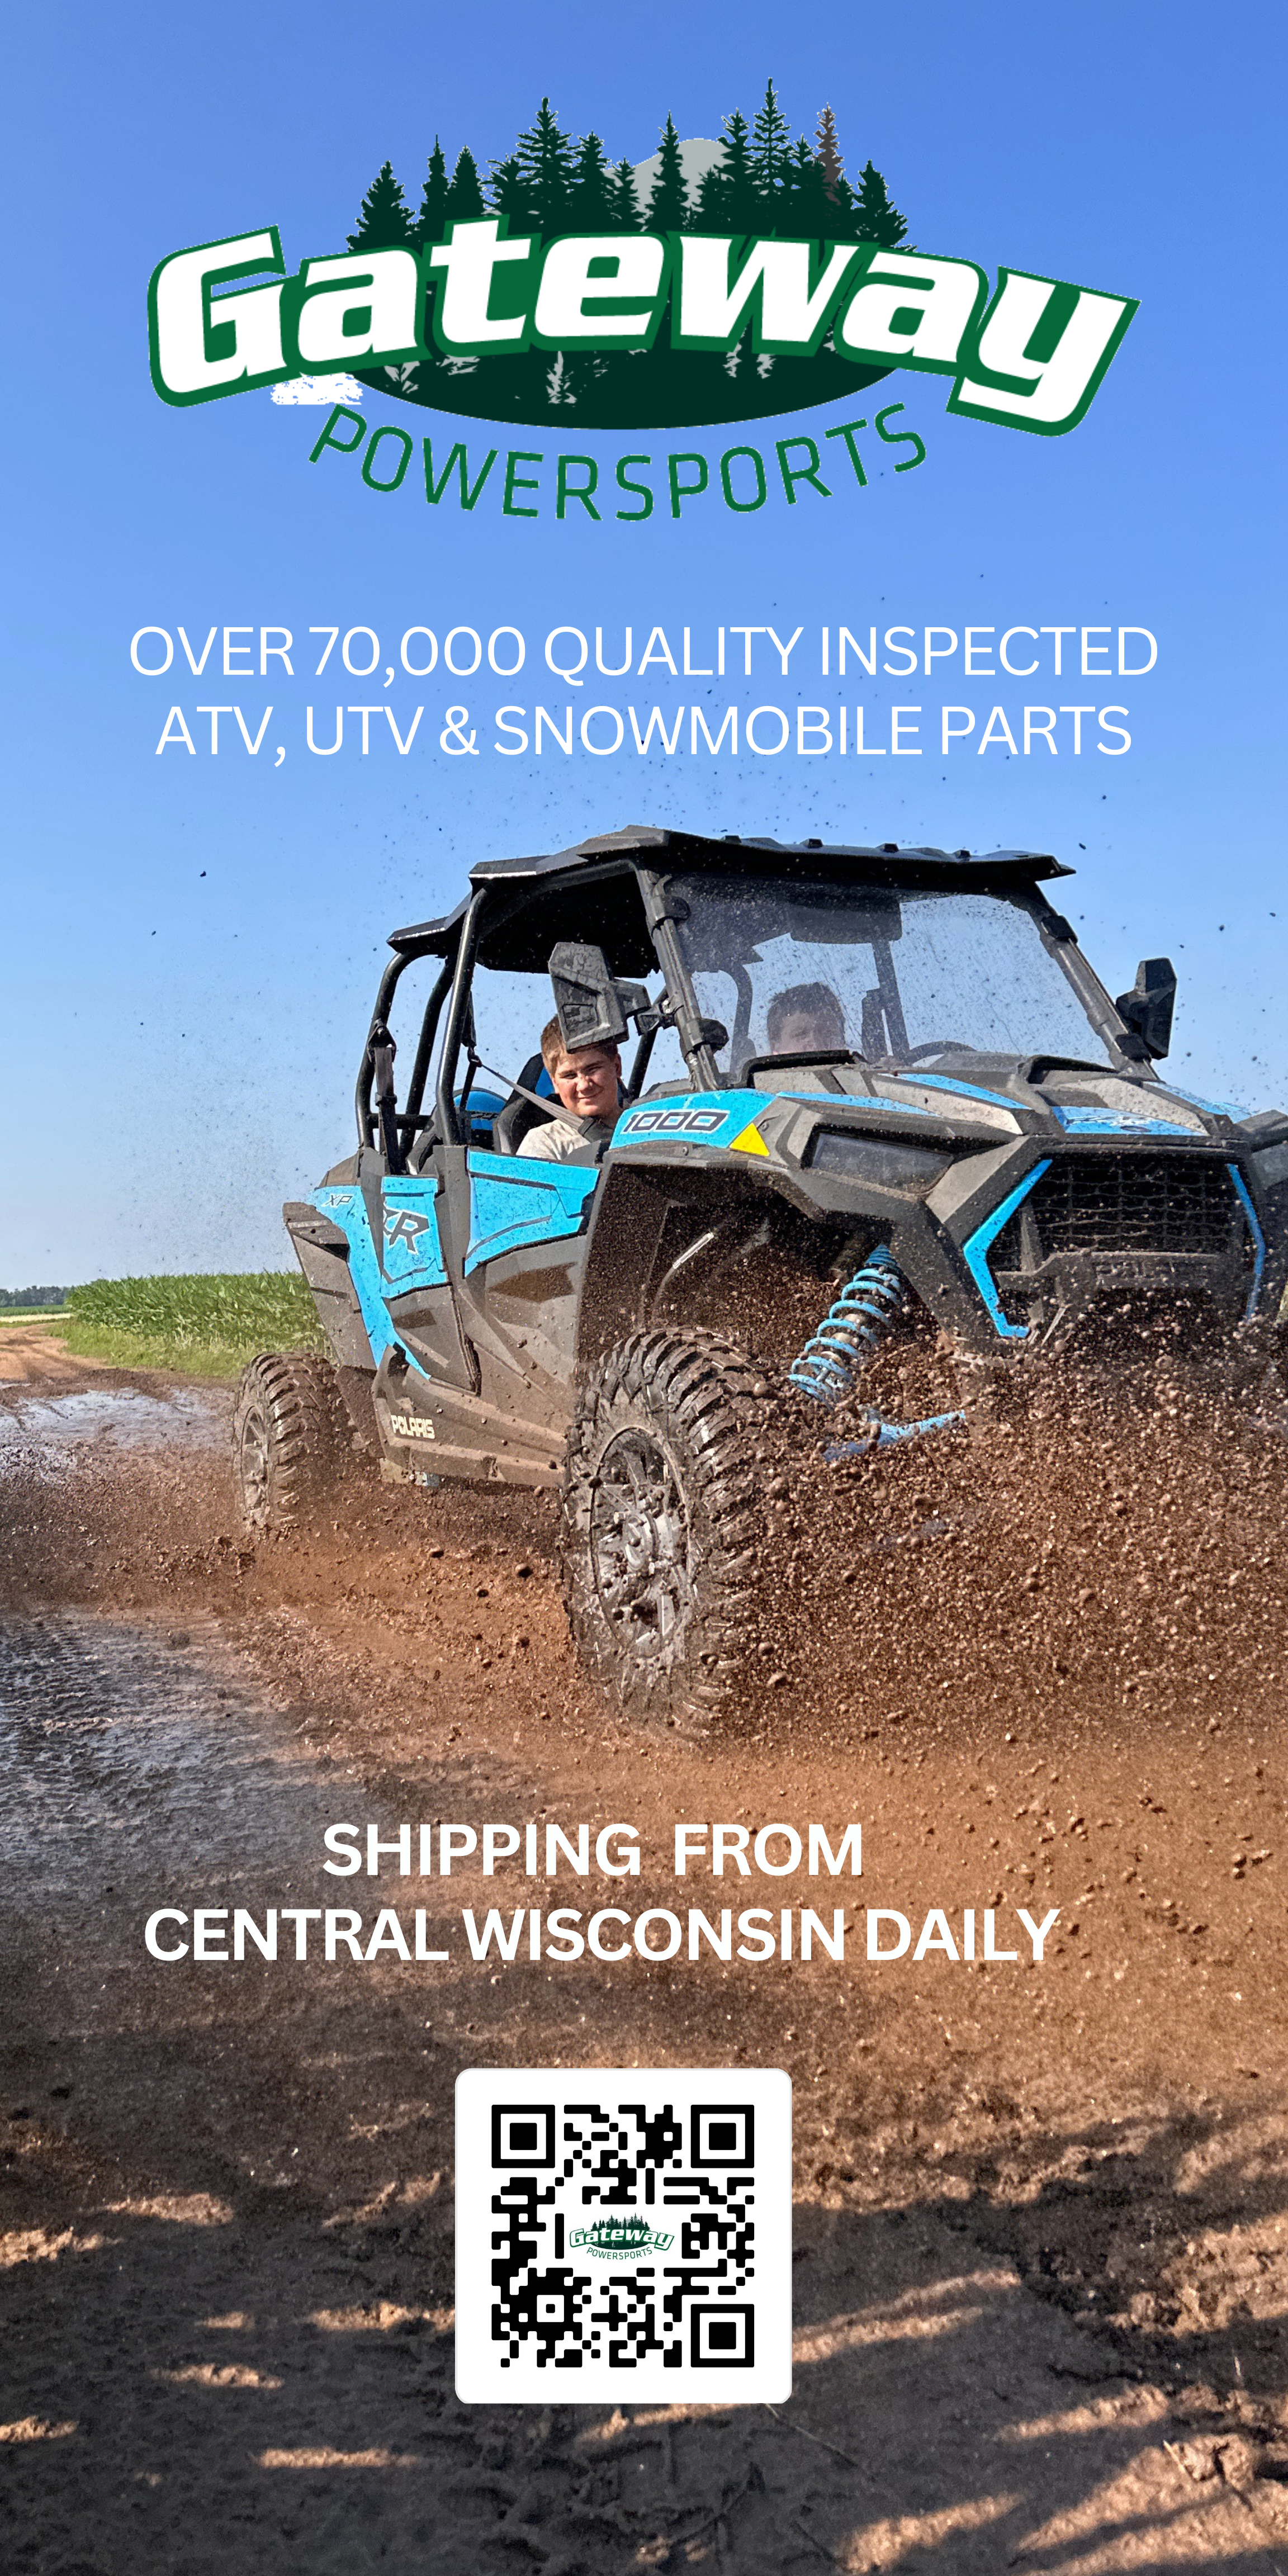 USED UTV Parts at Gateway Powersports in Baraboo, WI. shipping across the USA